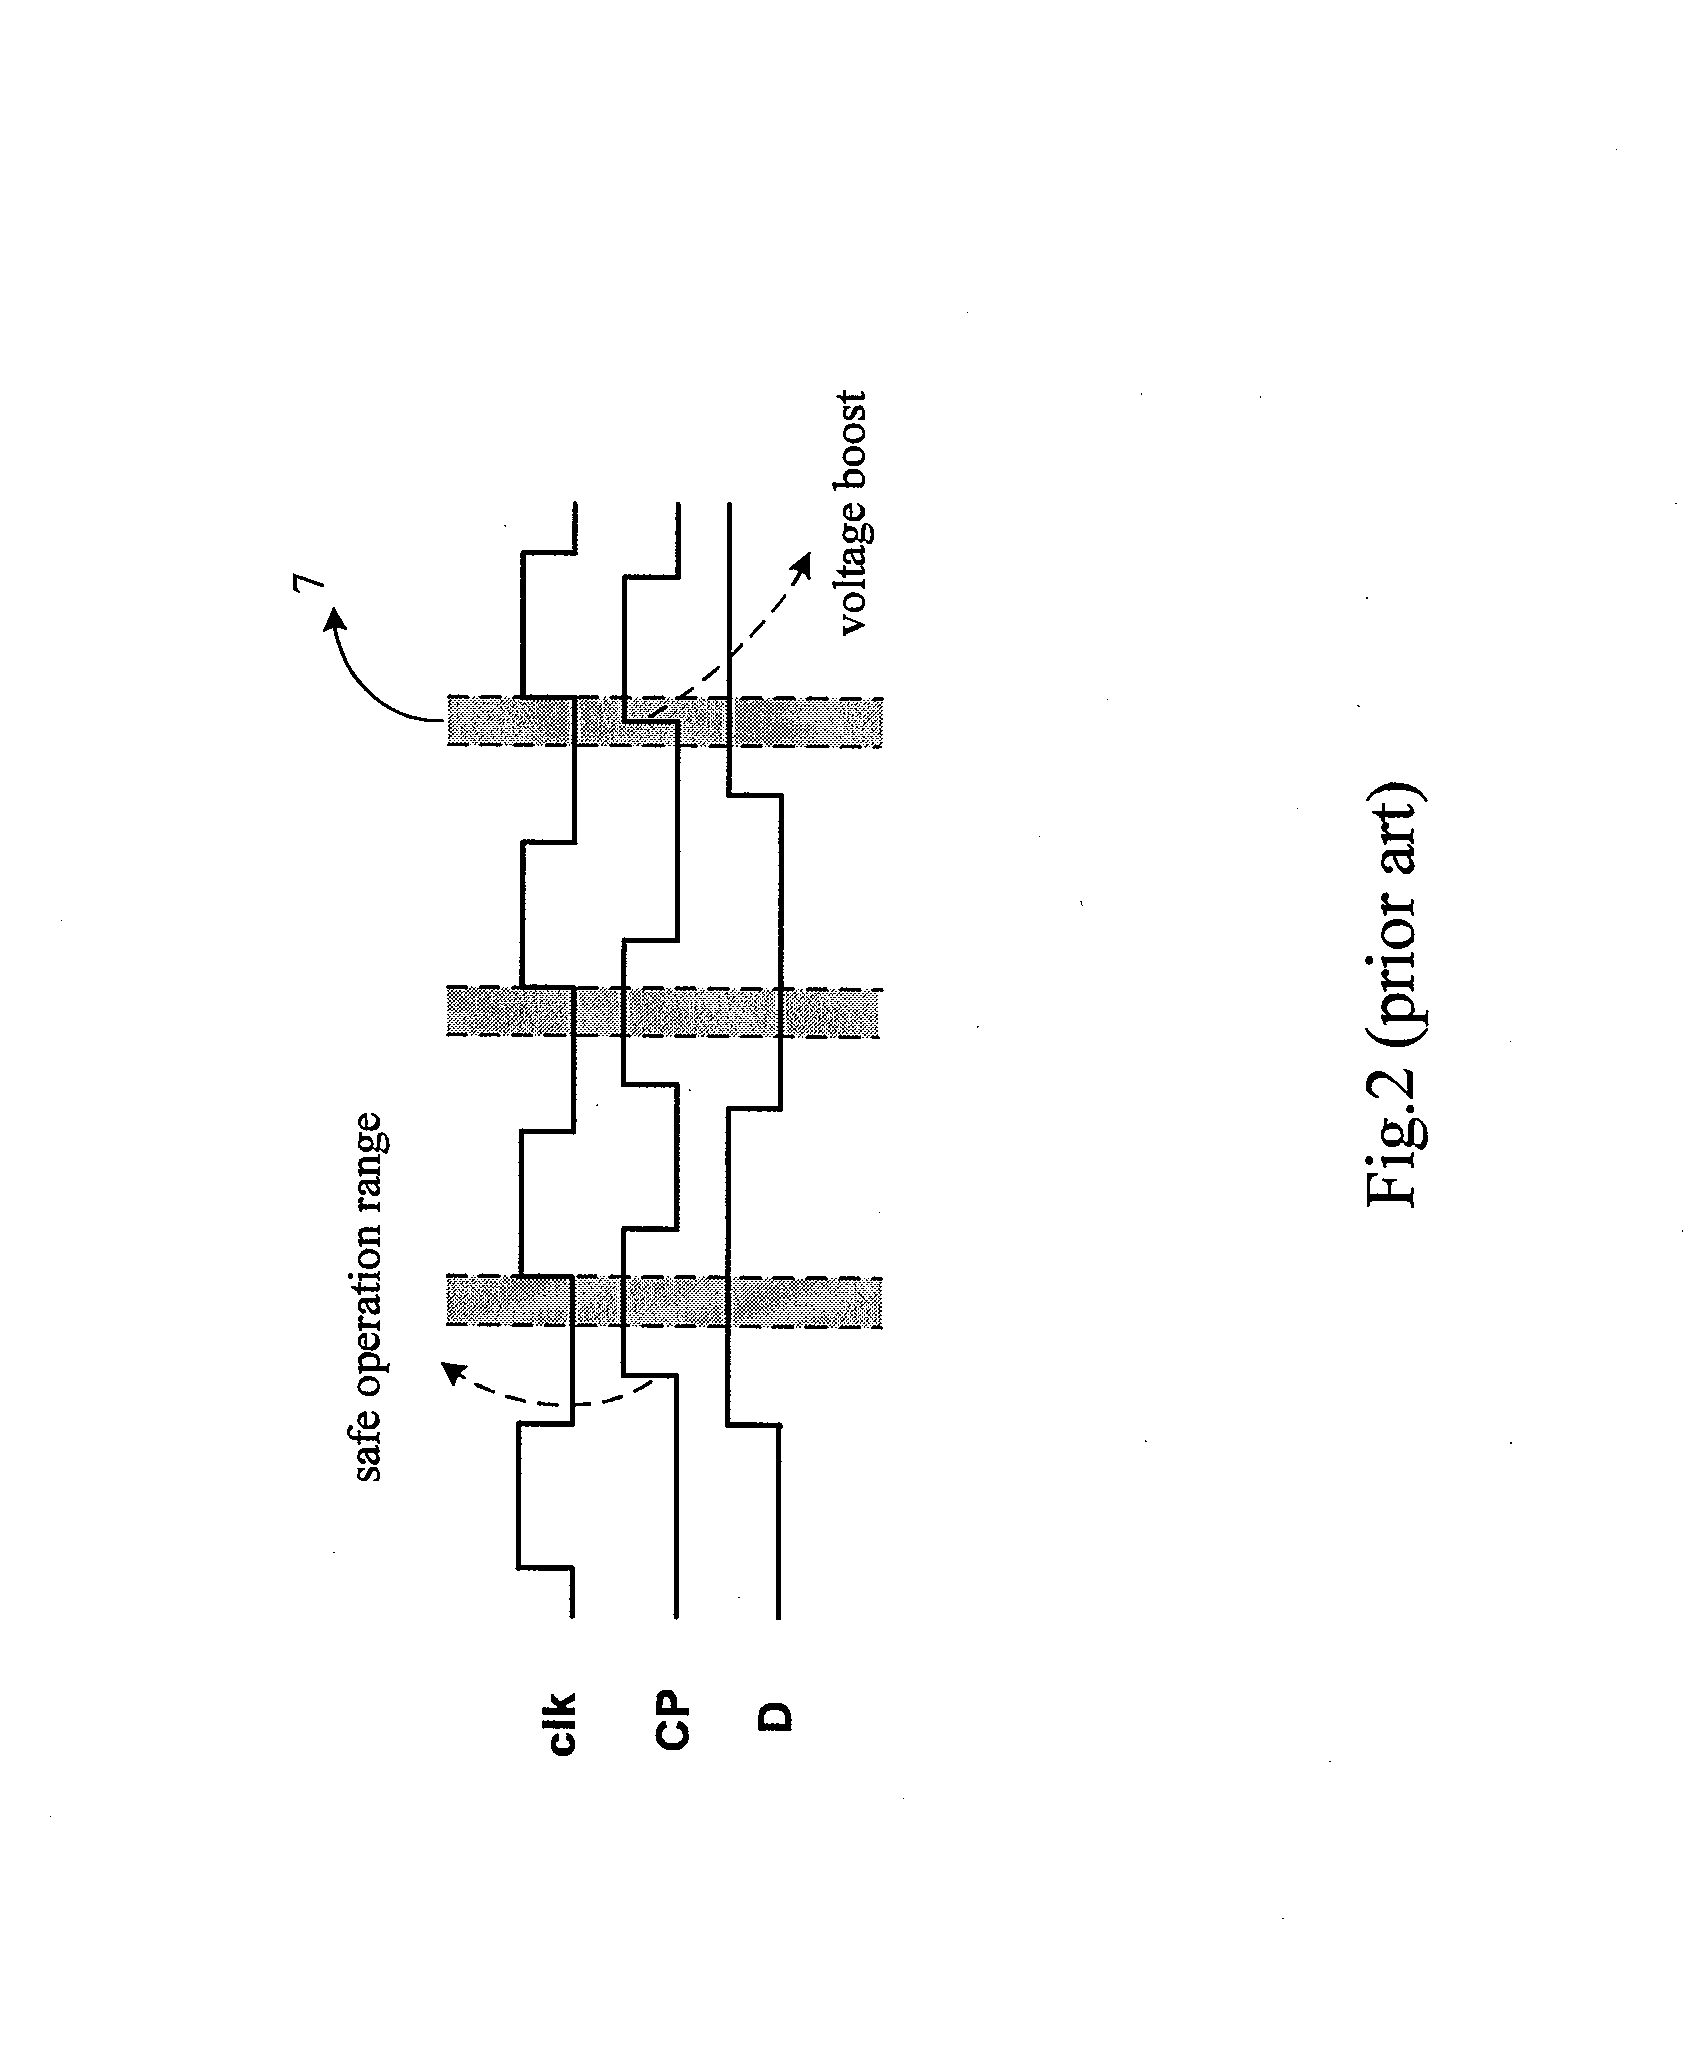 Dynamic voltage scaling system having time borrowing and local boosting capability